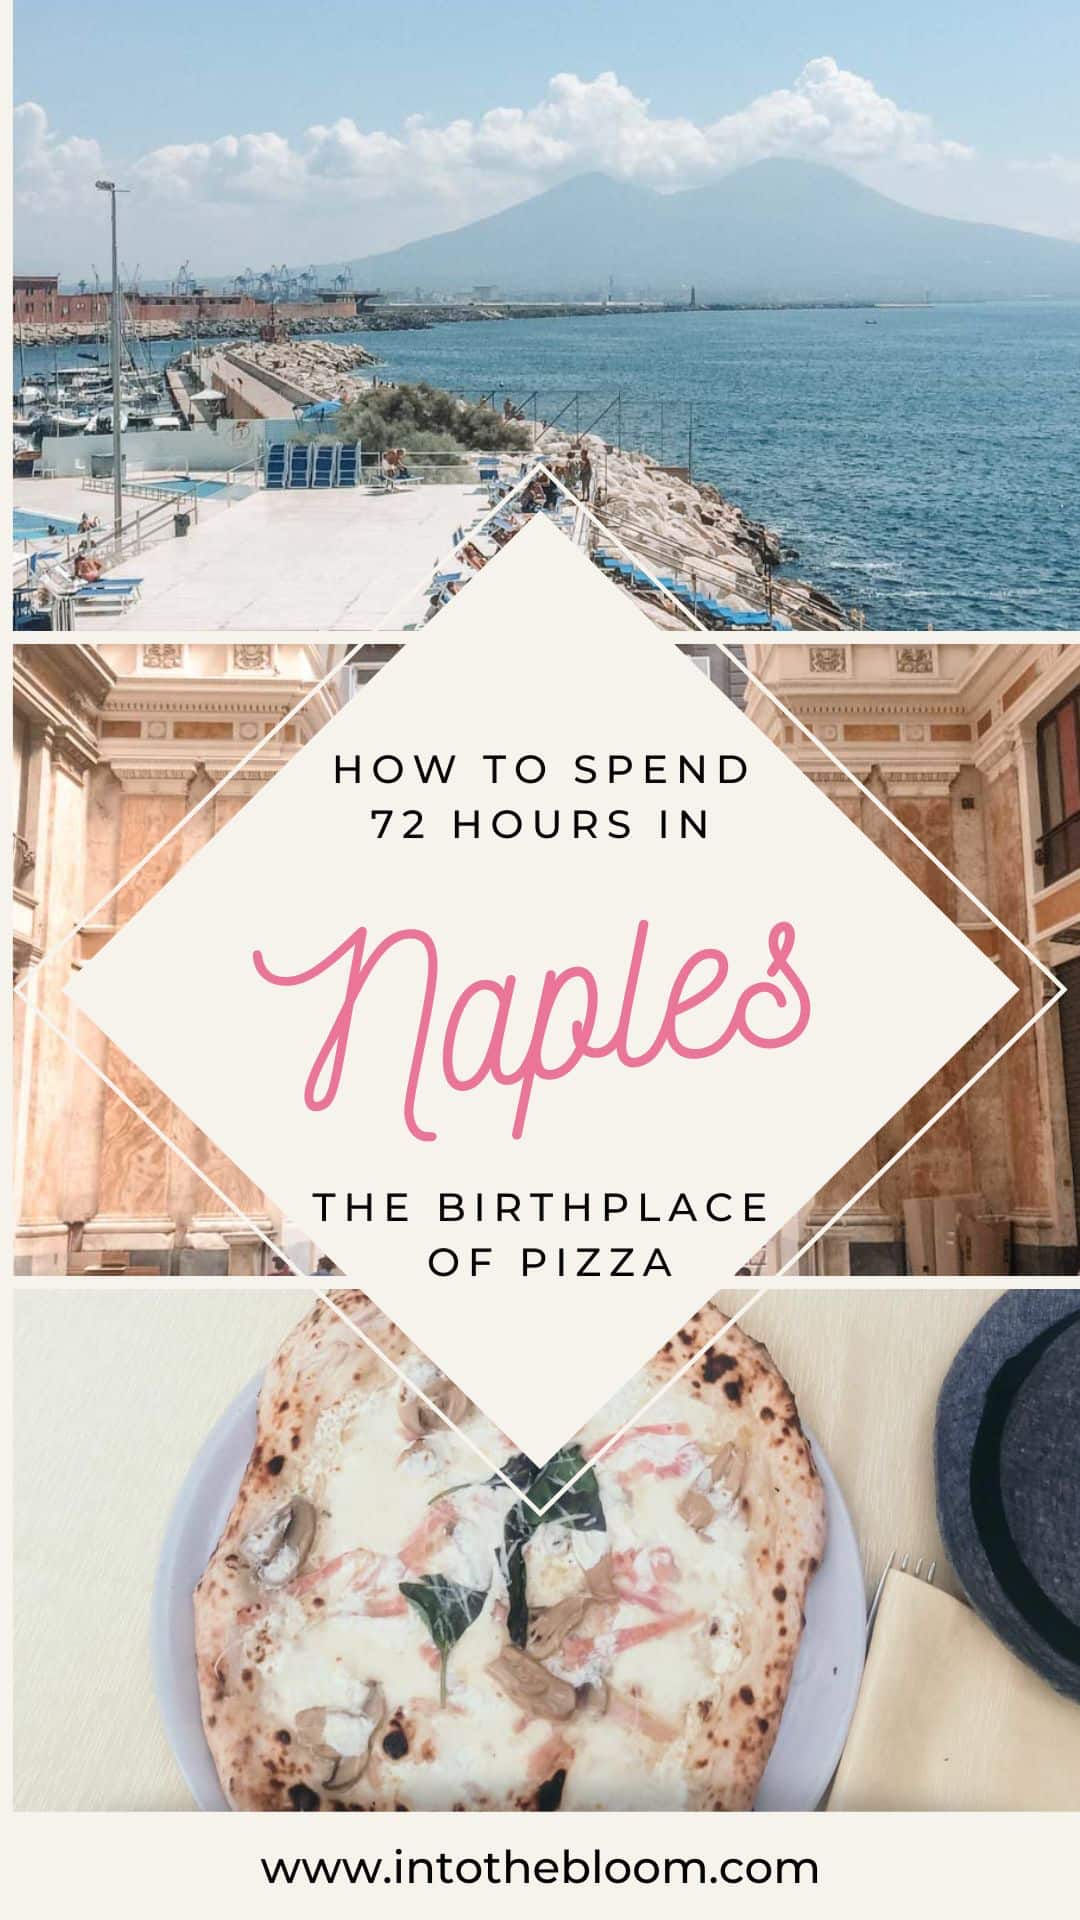 Naples Travel Guide - How to spend 72 hours in Naples - Best things to do in Naples